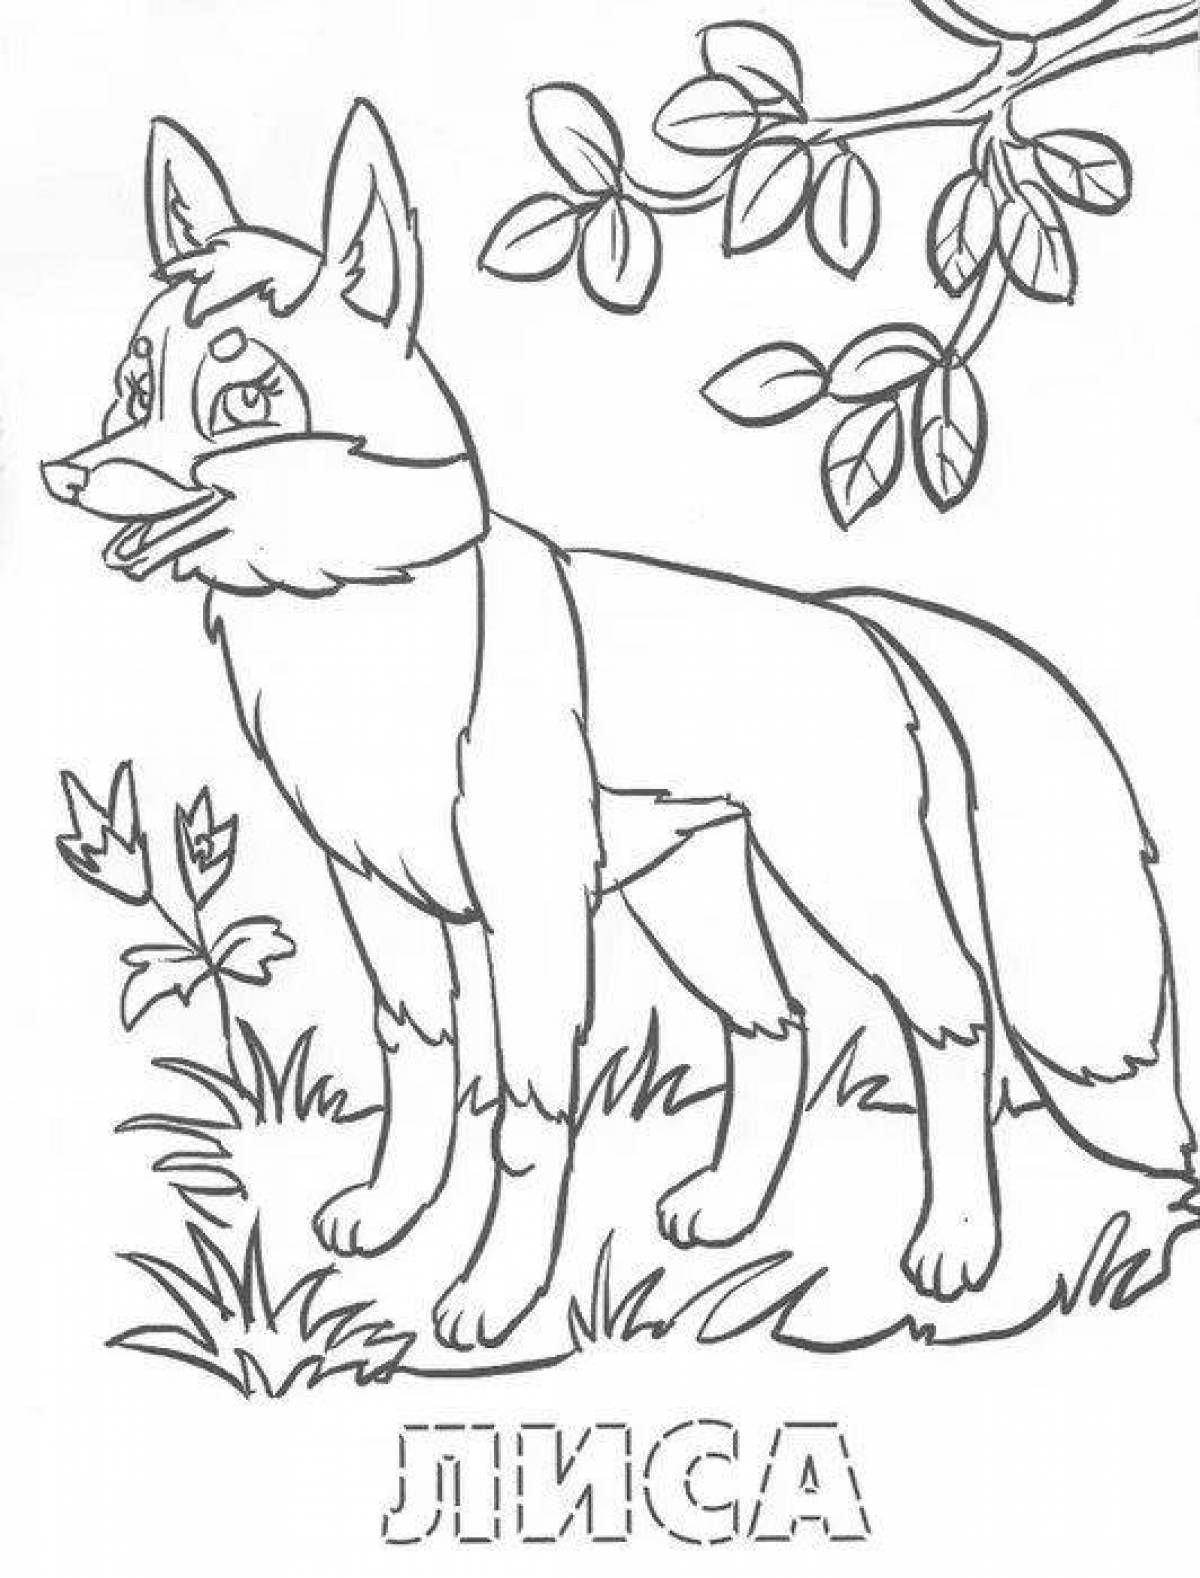 Funny forest animal coloring page